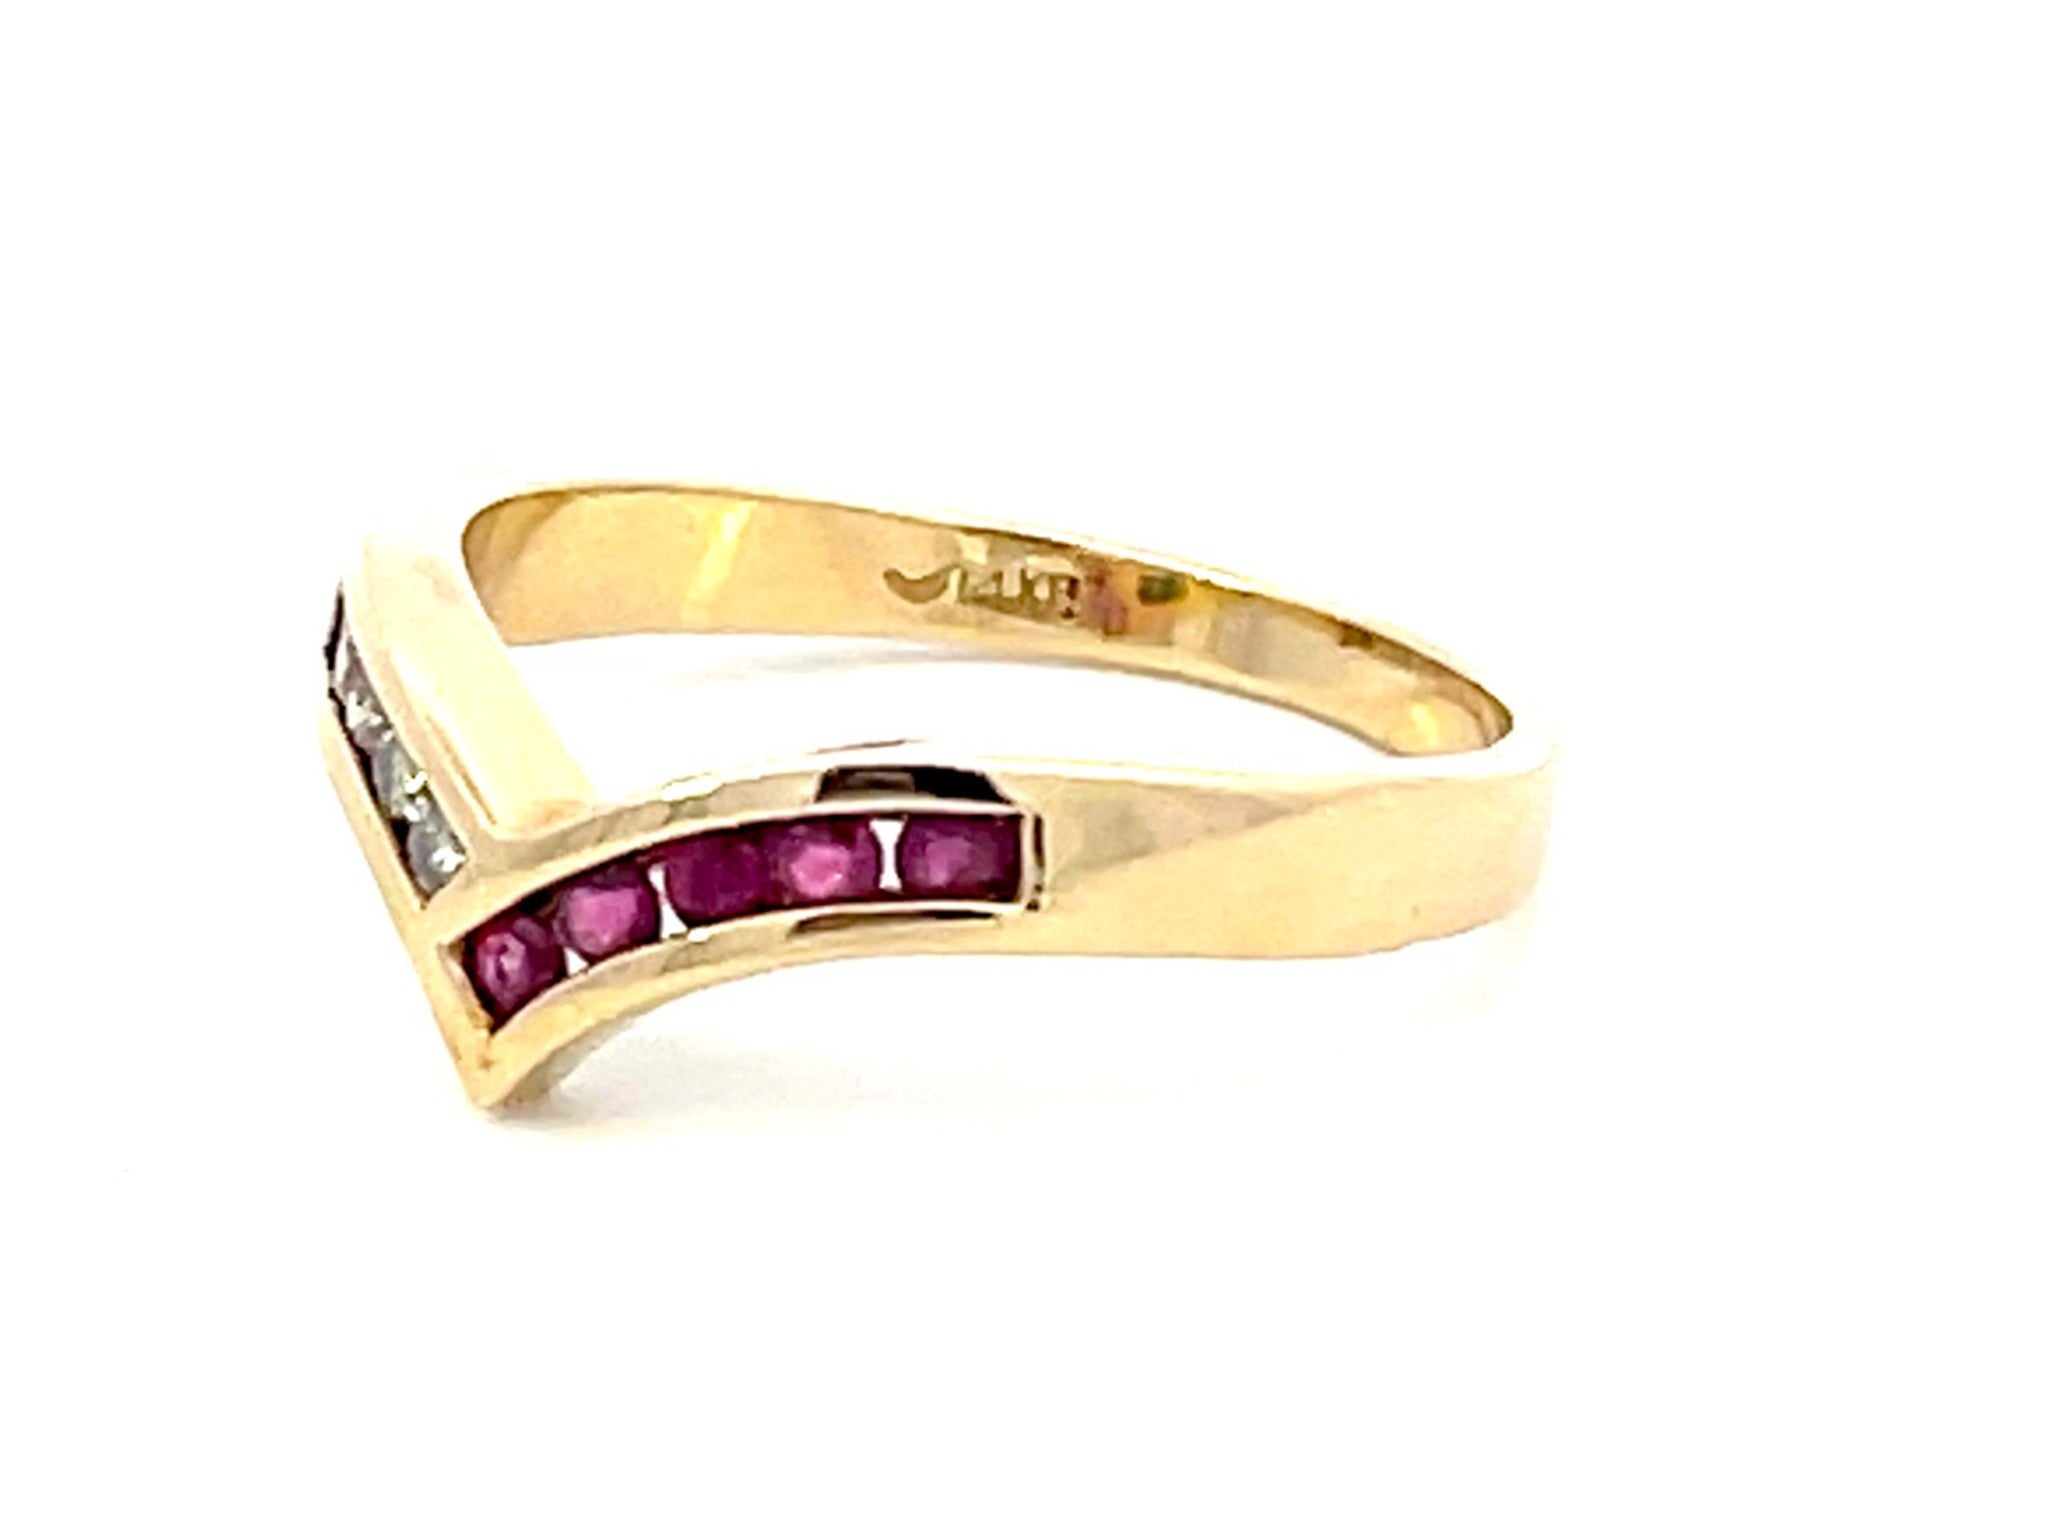 V Shaped Ruby Diamond Band Ring in 14k Yellow Gold